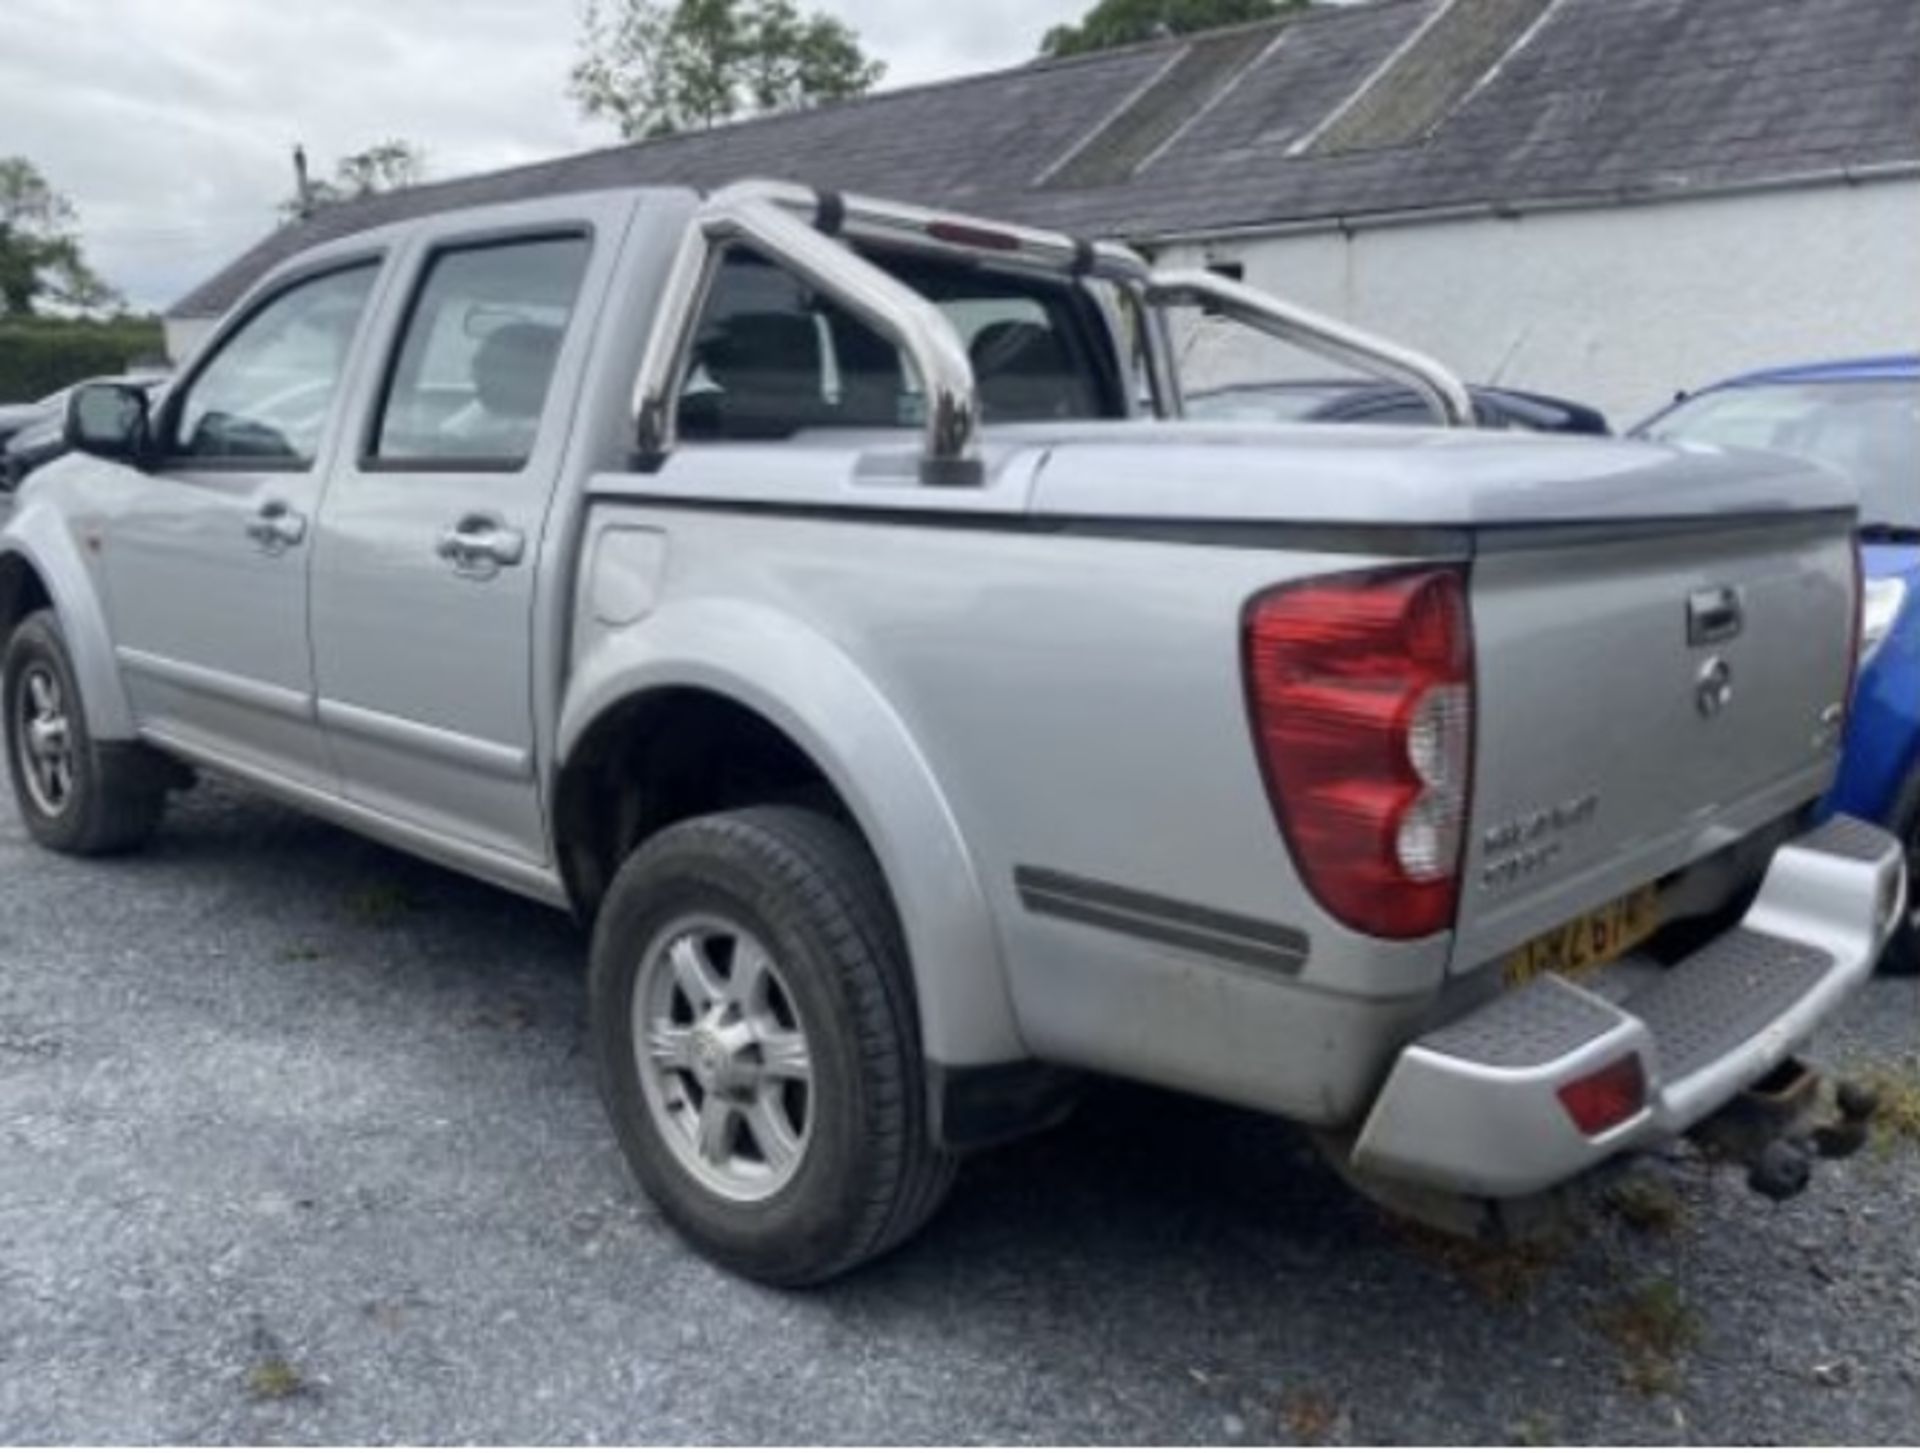 2013 GREAT WALL STEED 2.0 TD 4X4 PICK UP LOCATION N IRELAND - Image 3 of 7